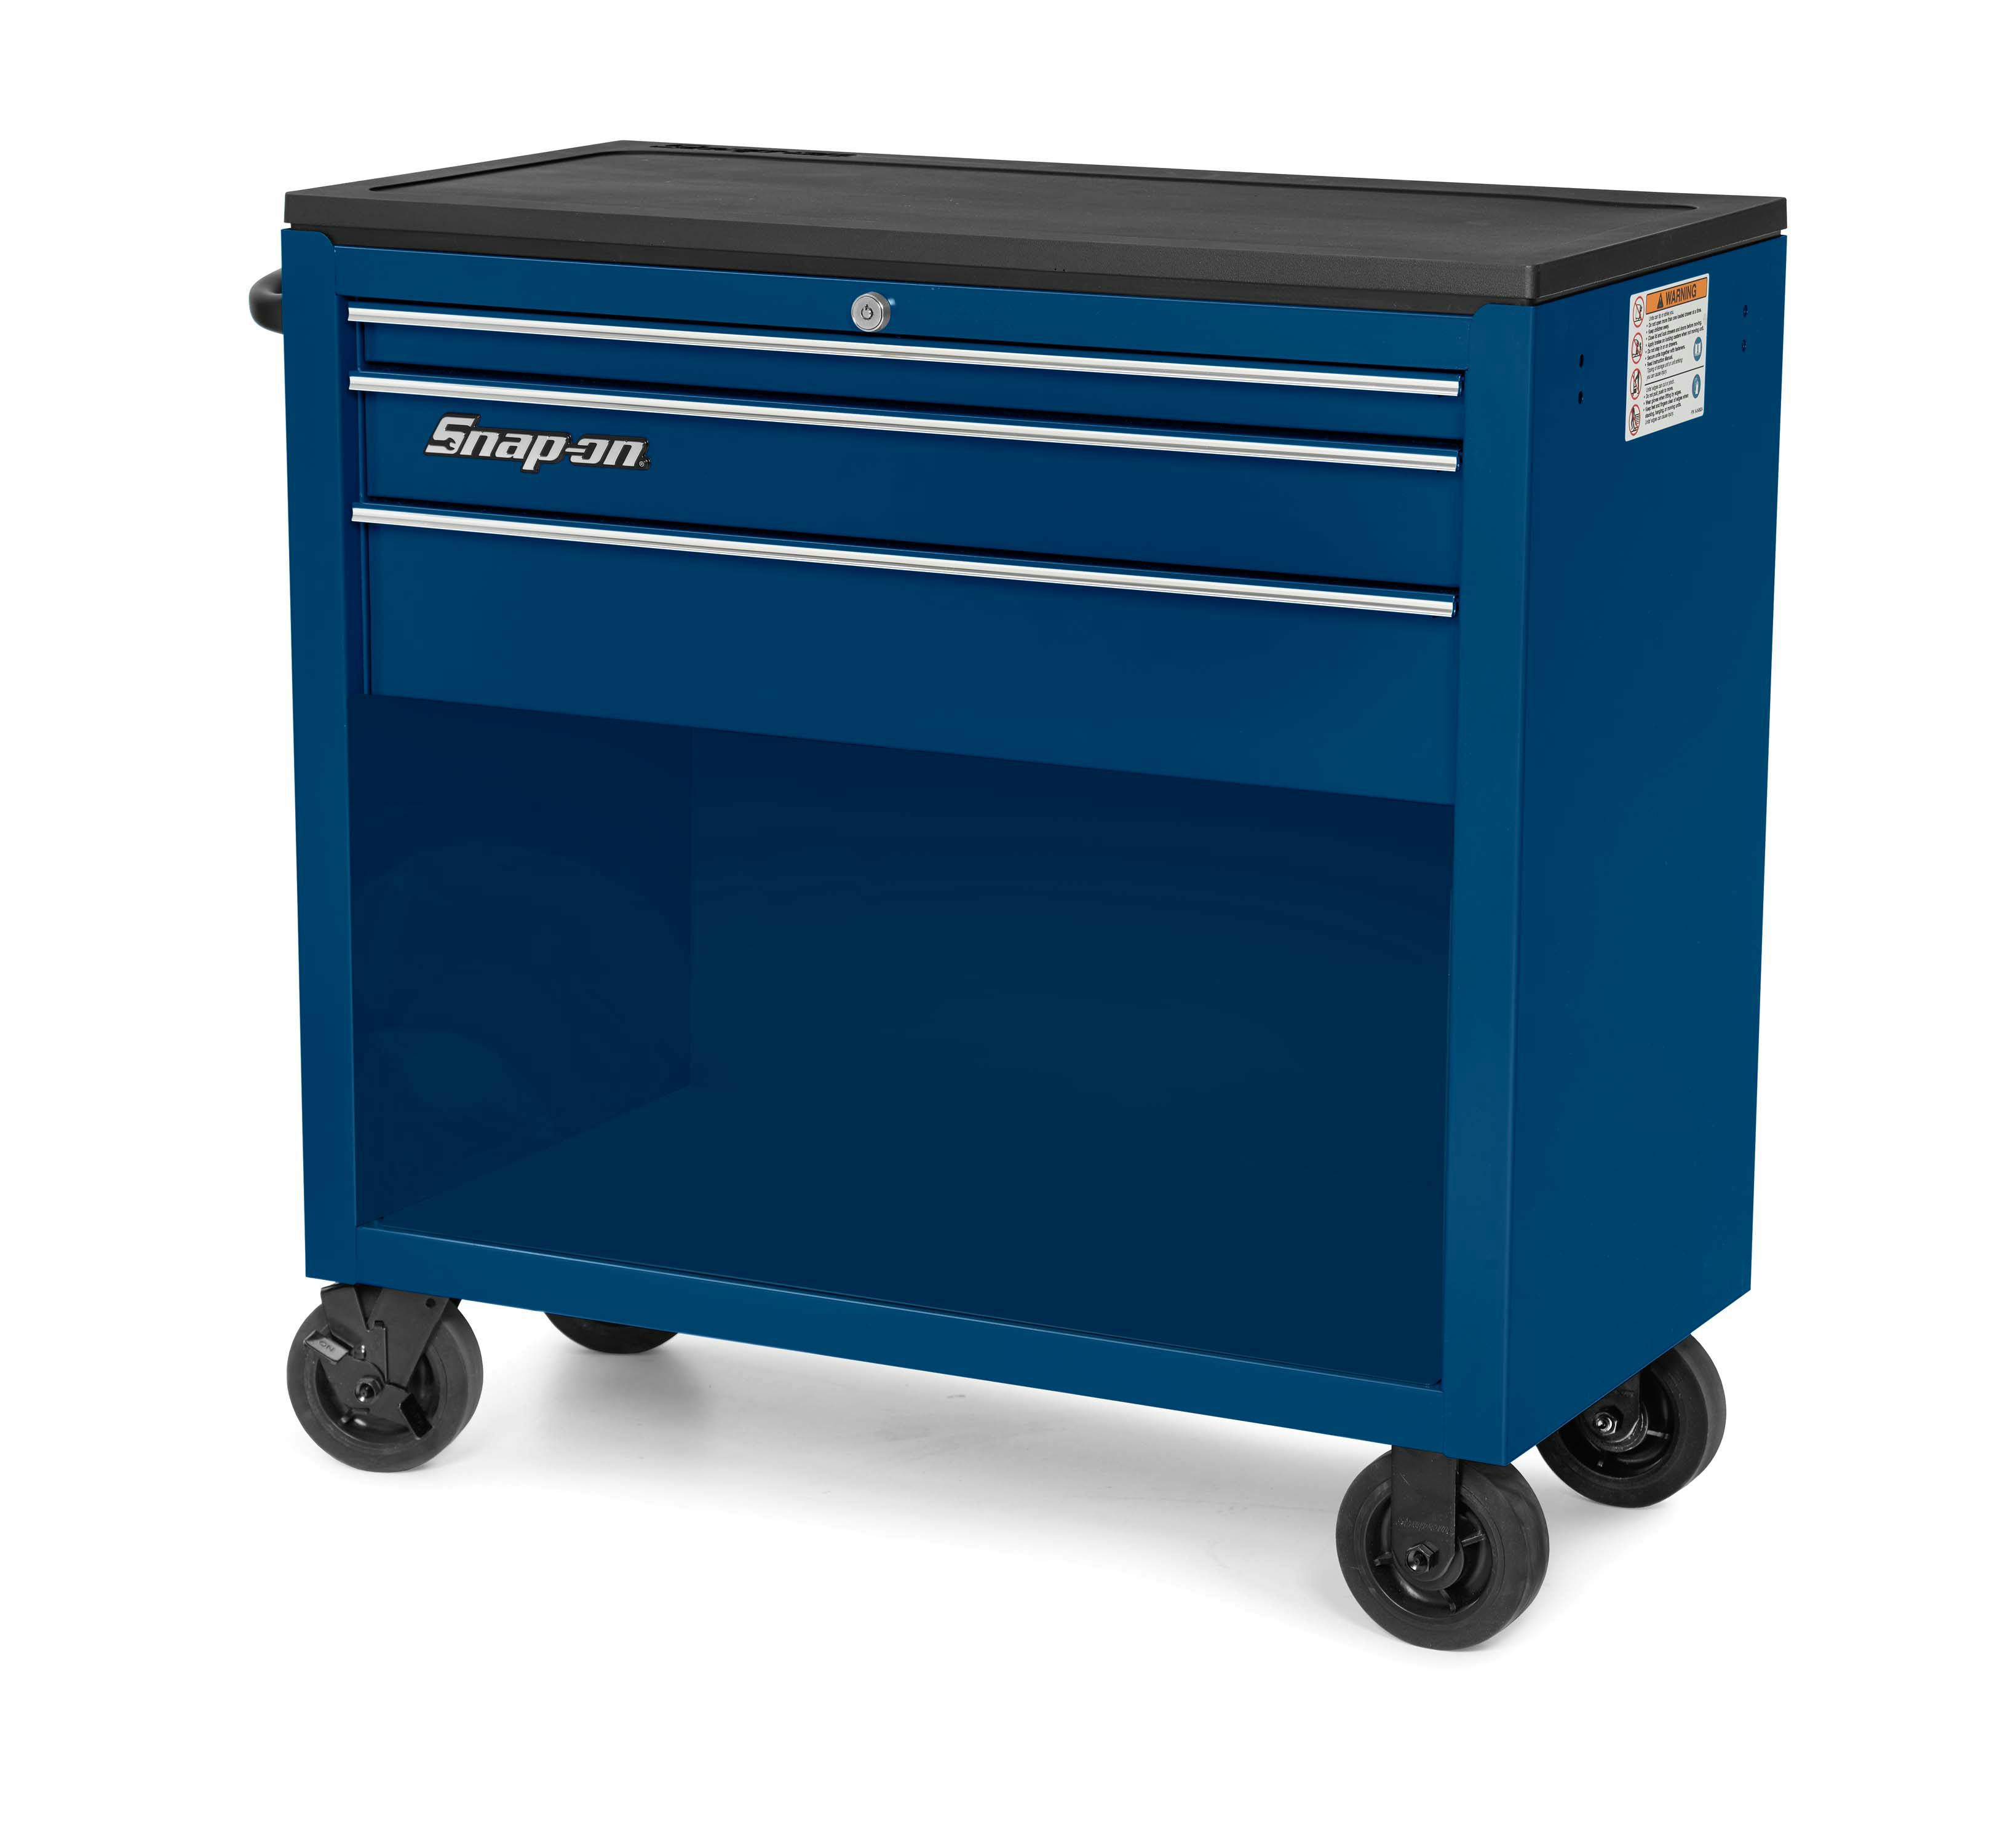 Snap on Snapon Snap-on KRL7003 royal blue tool cabinet - tools